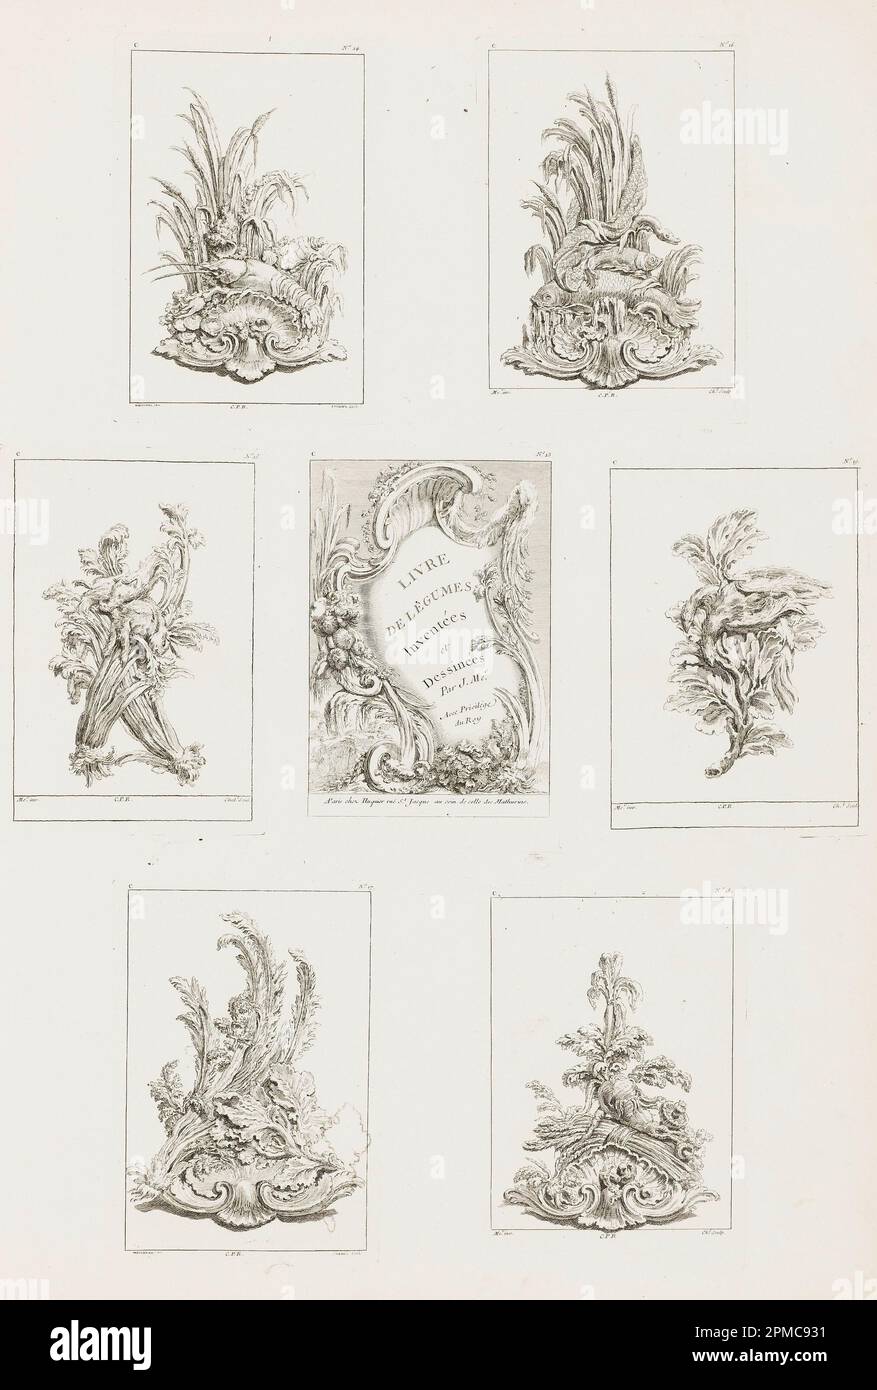 Print, Ornament Design with Wheat and Acanthus Leaves over Shell, from Livre des Legumes [Series of Vegetable Ornament], pl. 17 in Oeuvre de Juste-Aurèle Meissonnier; Designed by Juste-Aurèle Meissonnier (French, b. Italy, 1695–1750); Engraved by Pierre-Quentin Chedel (1705 – 1763); Published by Gabriel Huquier (French, 1695–1772); France; etching on off-white laid paper; 16 x 11.2 cm (6 5/16 x 4 7/16 in.) Stock Photo